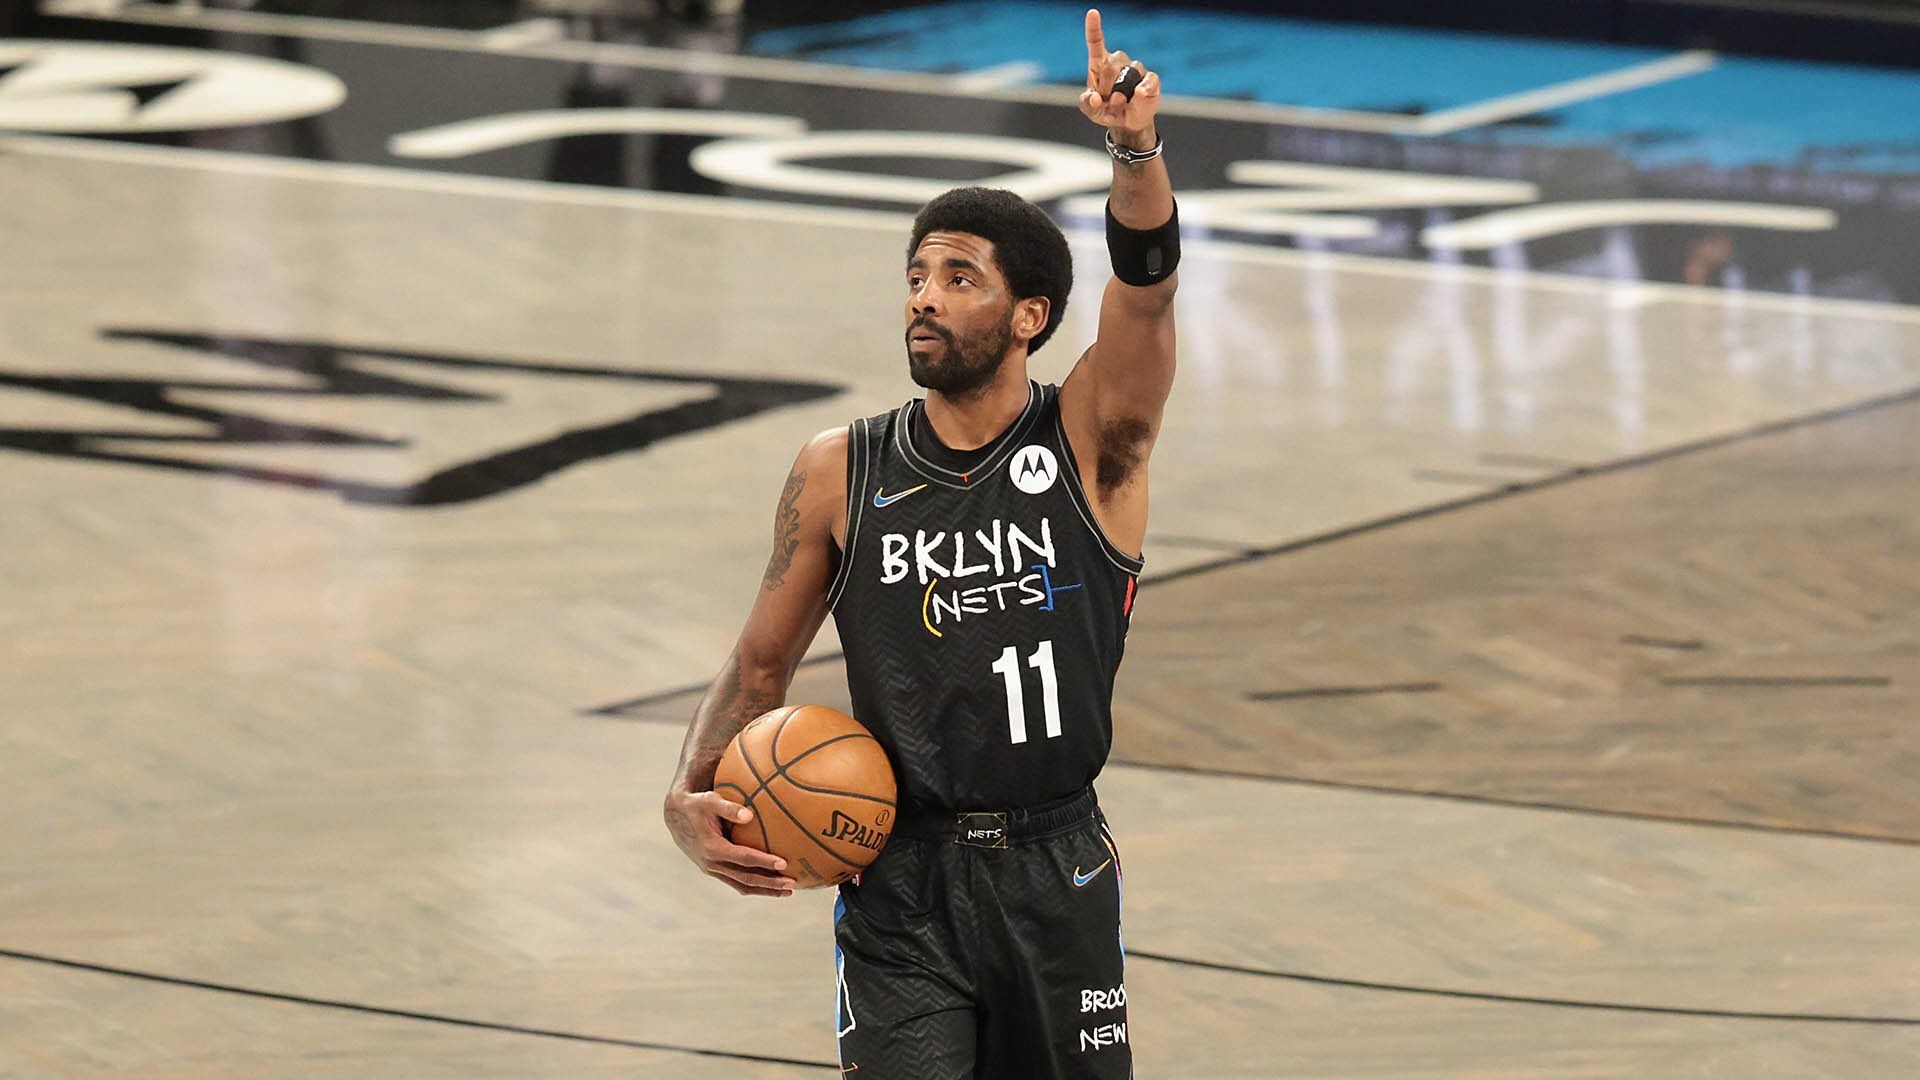 Brooklyn Nets’ Kyrie Irving blames racism for post-game bottle heckle